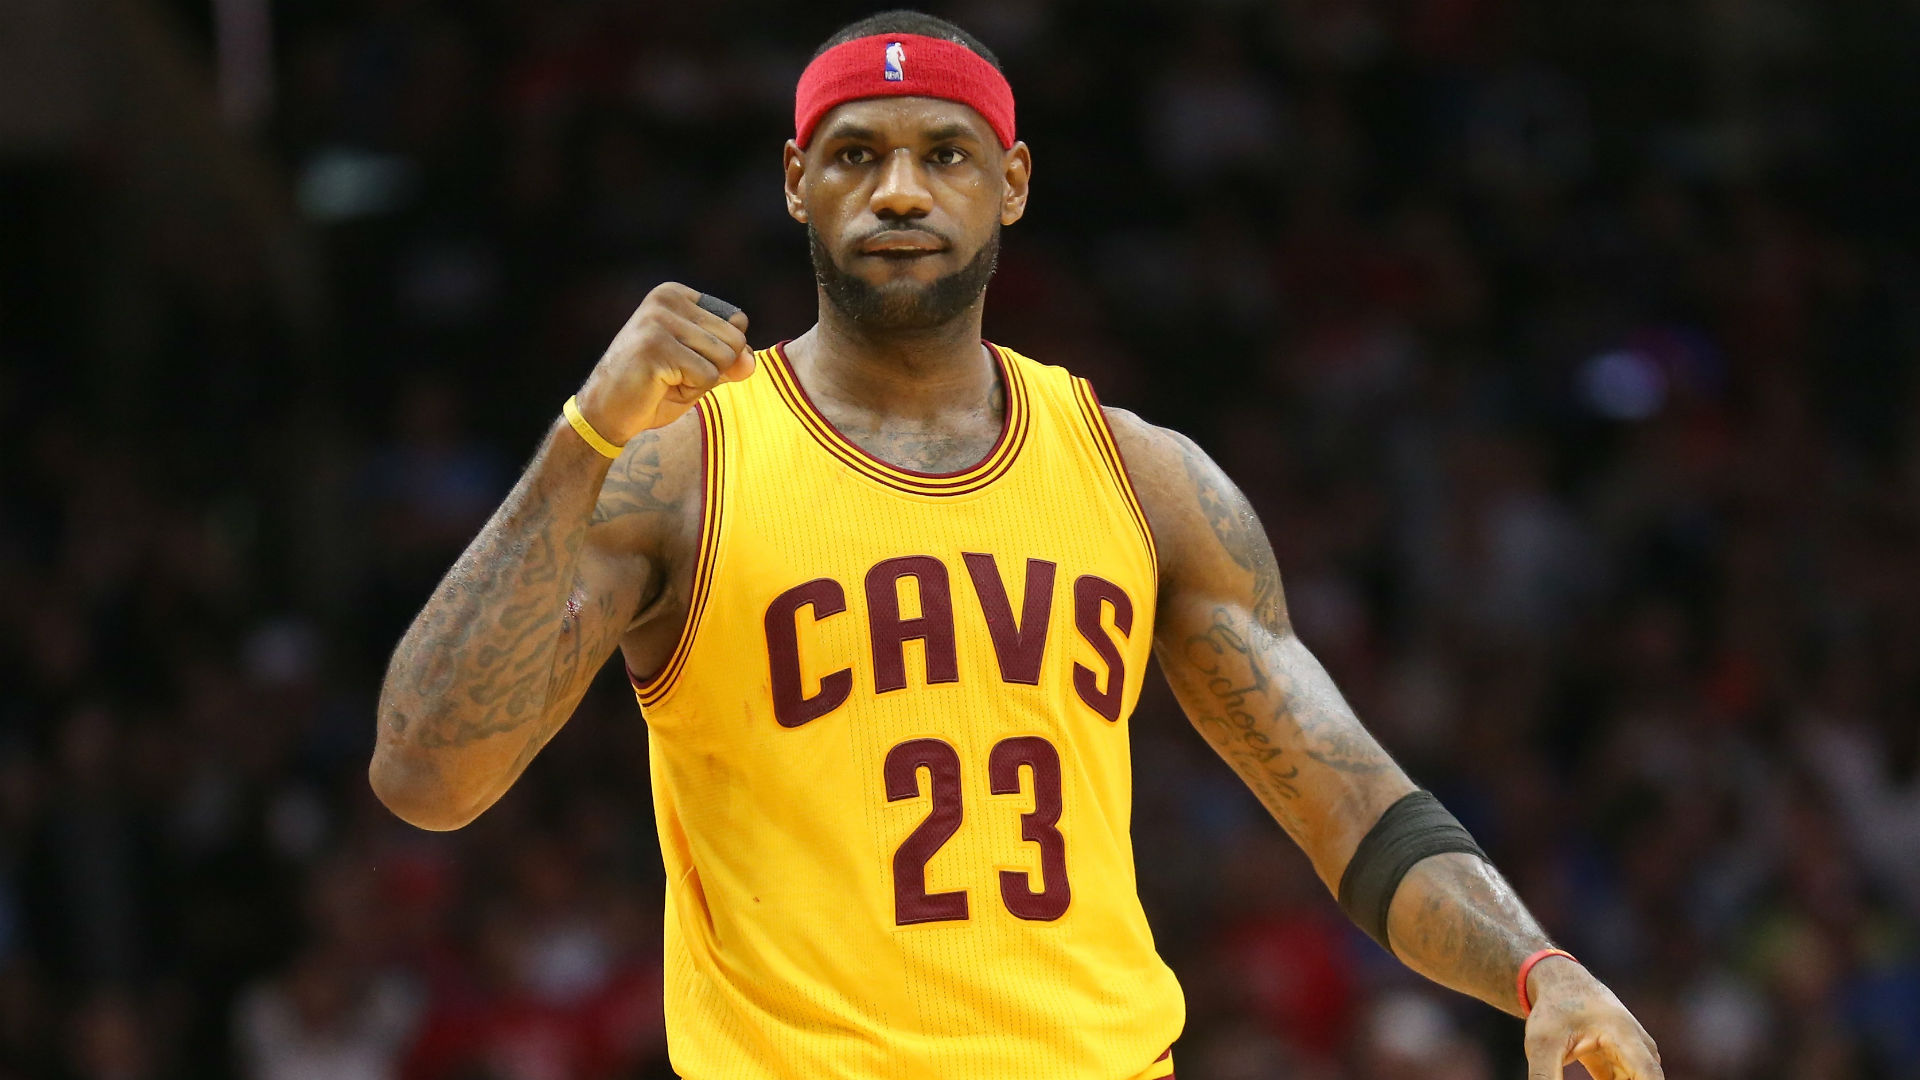 LeBron James will exercise the exit option included in his contract and become a free agent